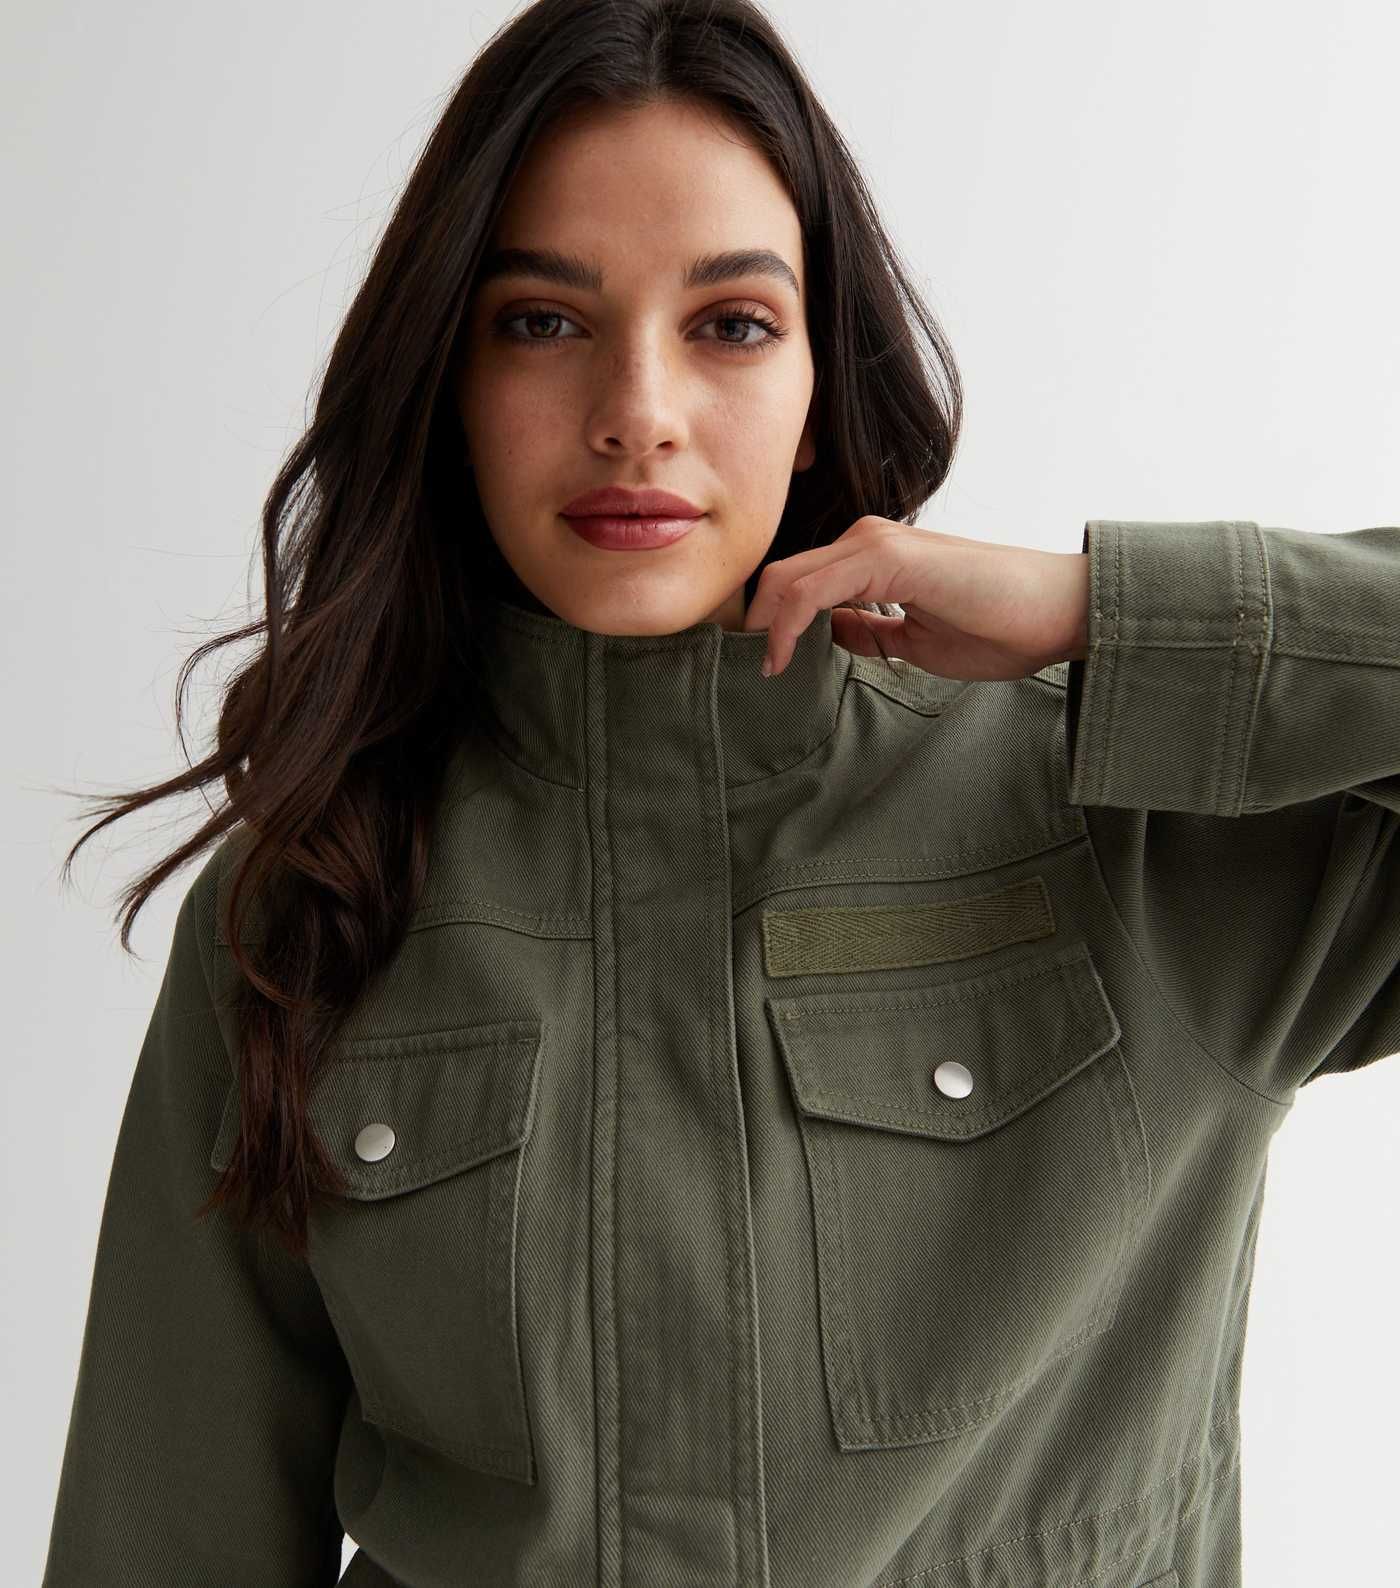 Khaki High Neck Pocket Front Jacket
						
						Add to Saved Items
						Remove from Saved Items | New Look (UK)